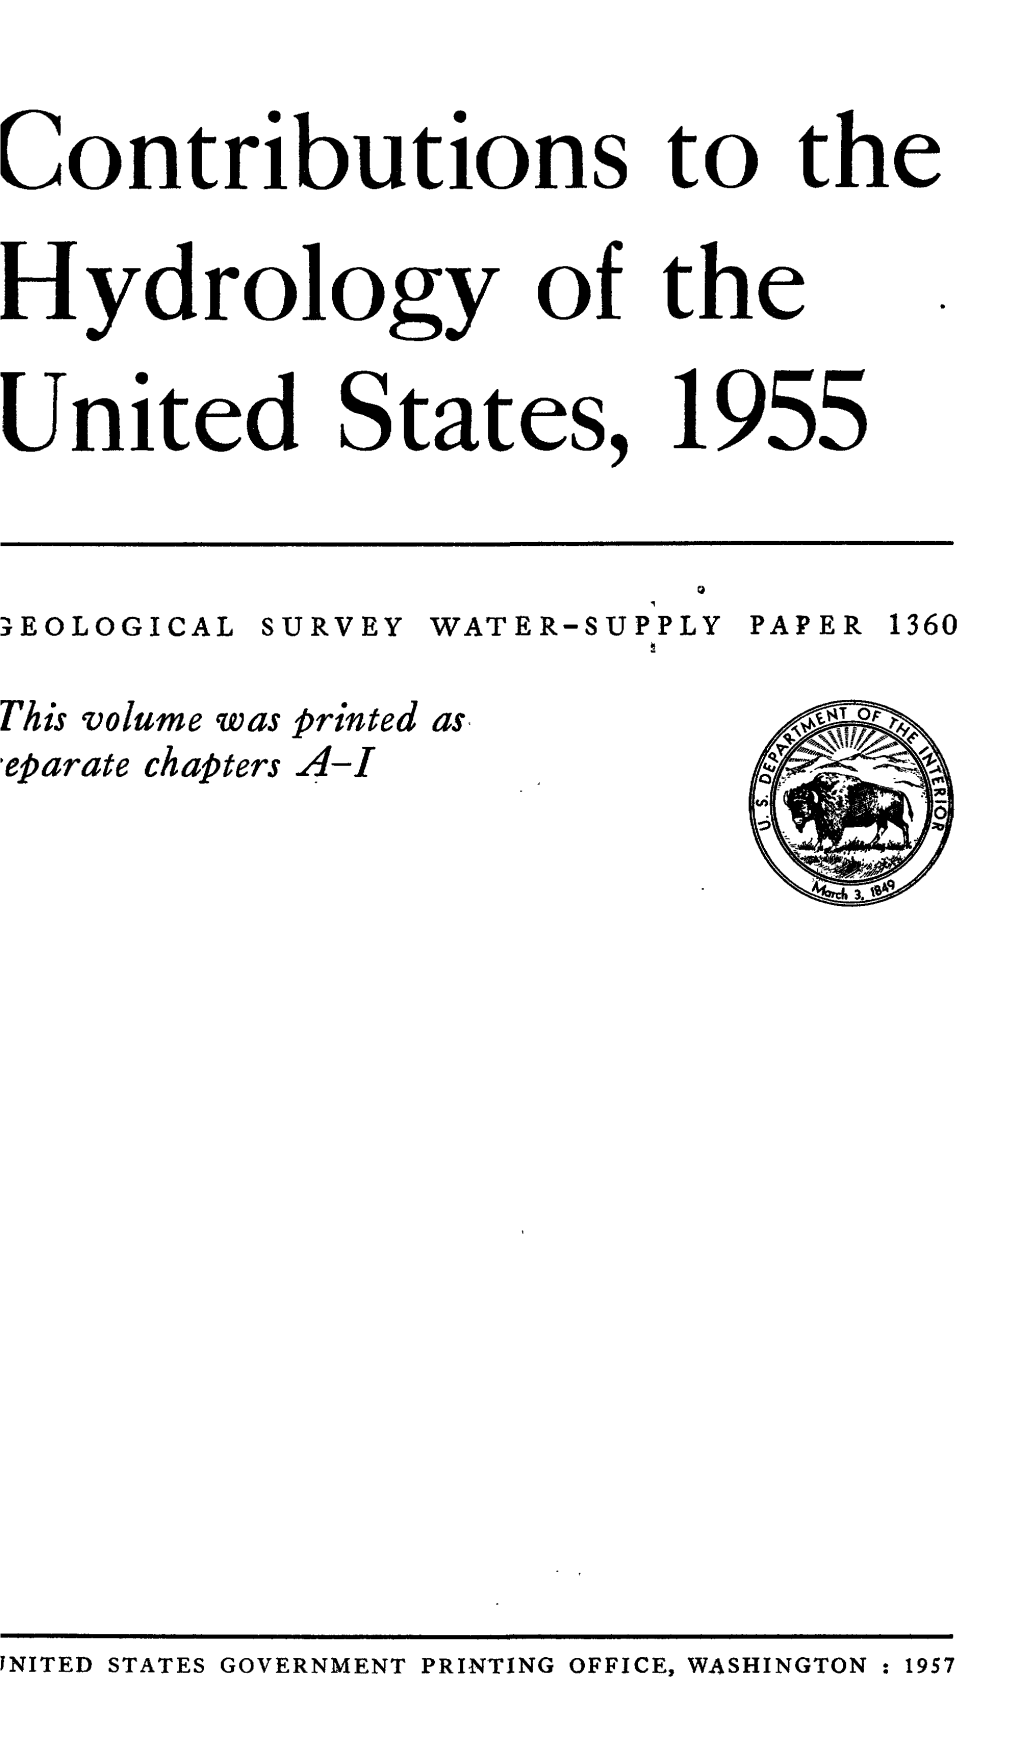 Contributions to the Hydrology of the United States, 1955